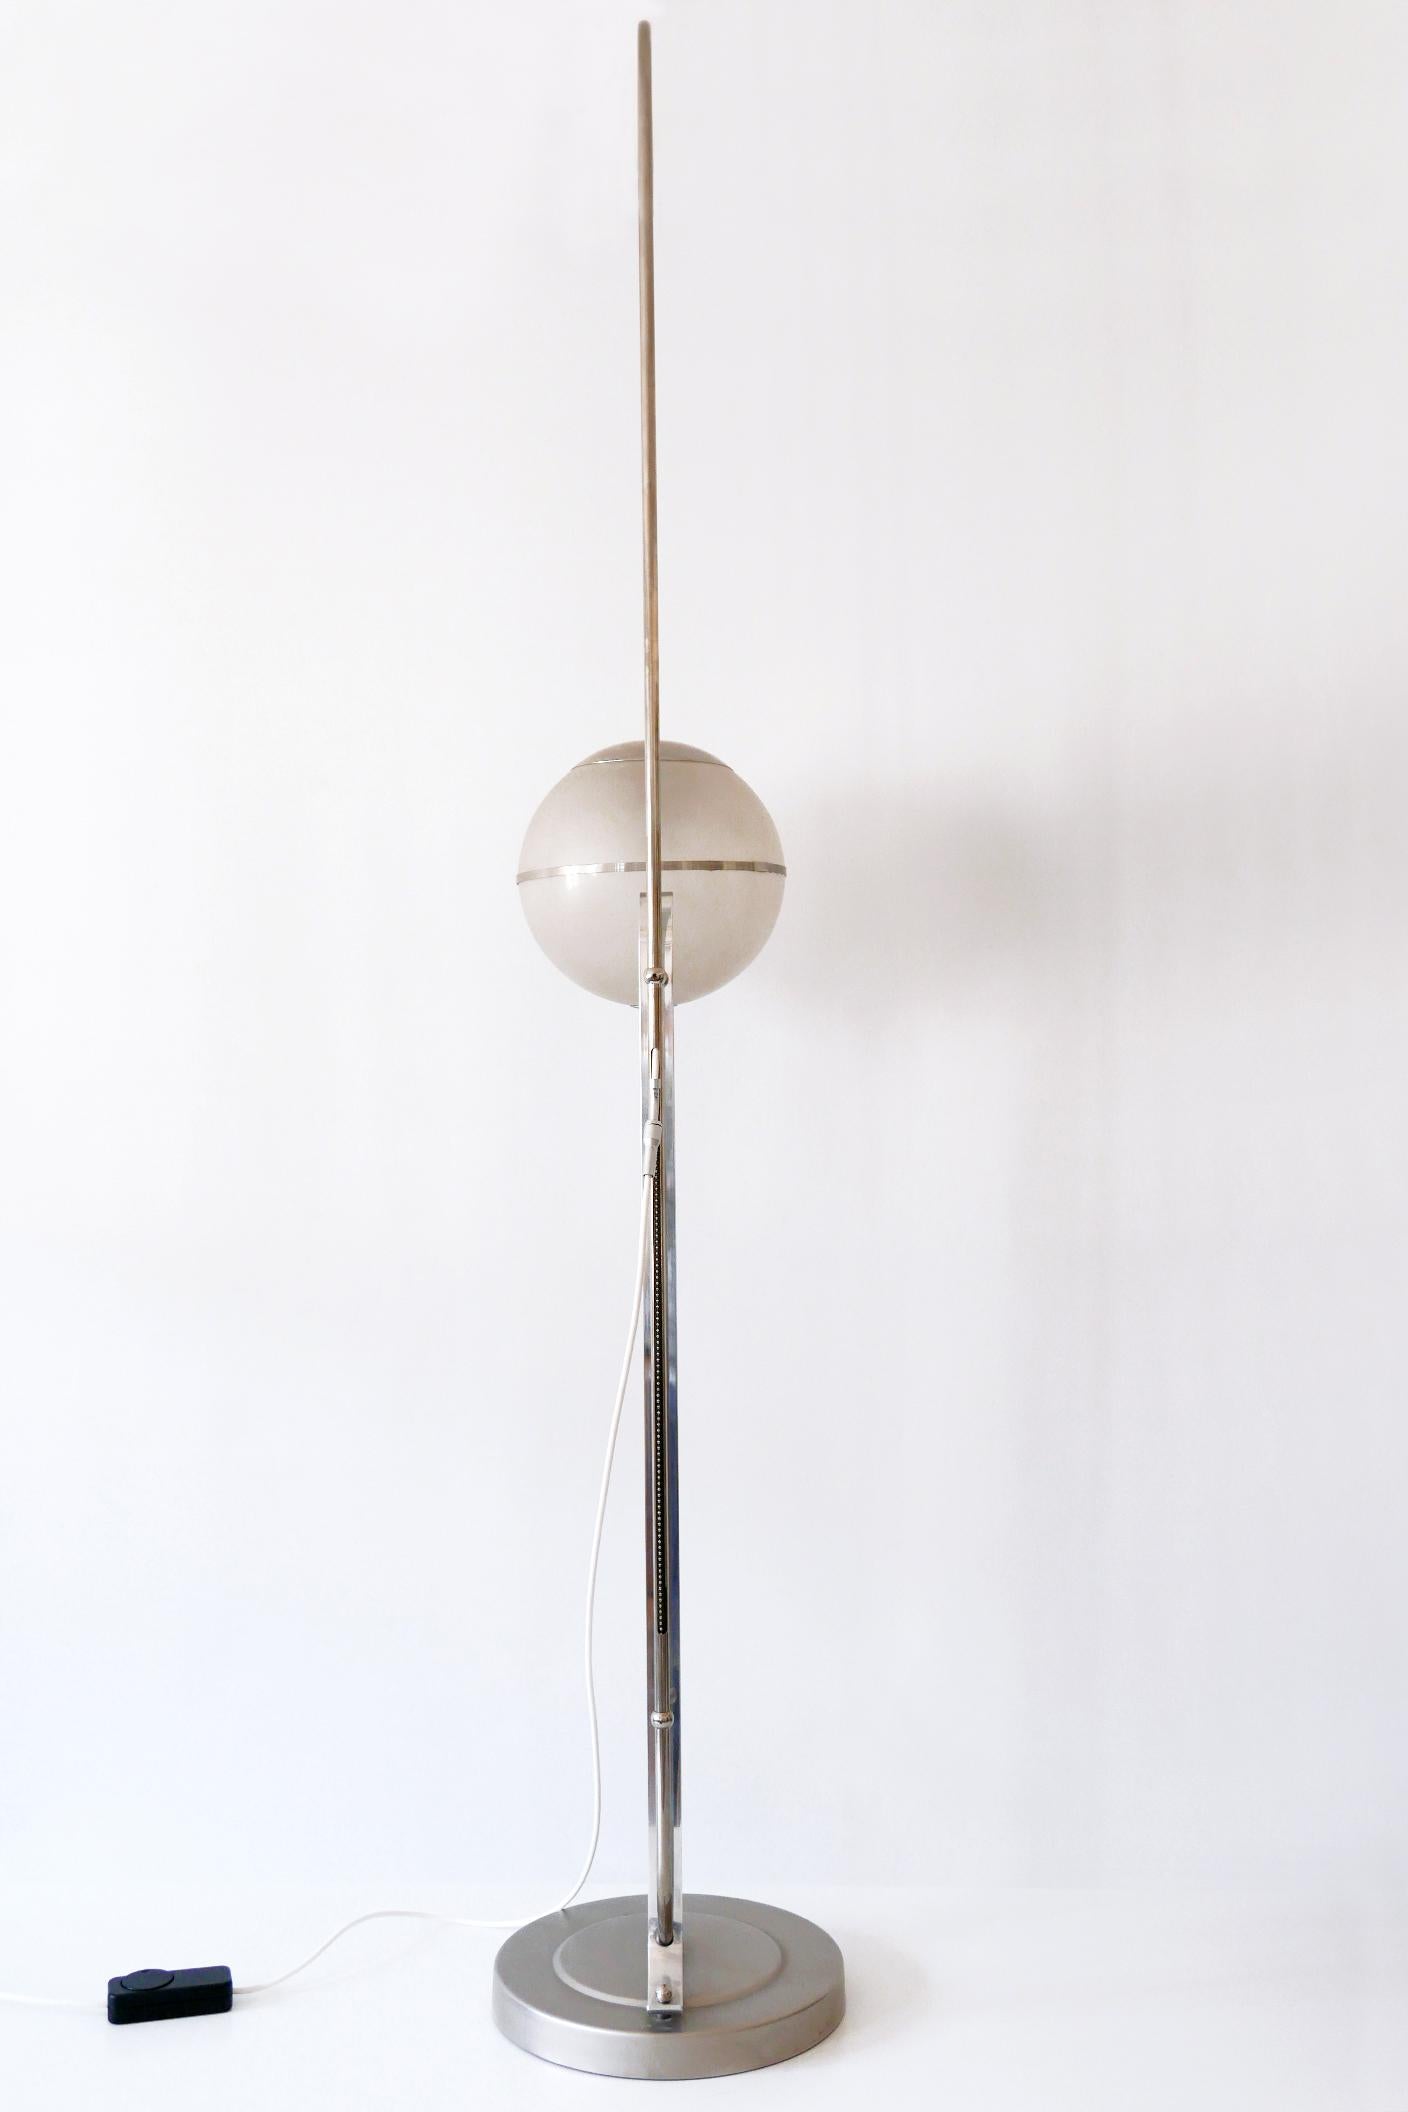 Bauhaus Floor Lamp by Karl Trabert for Schanzenbach & Co 1930s Germany For Sale 3